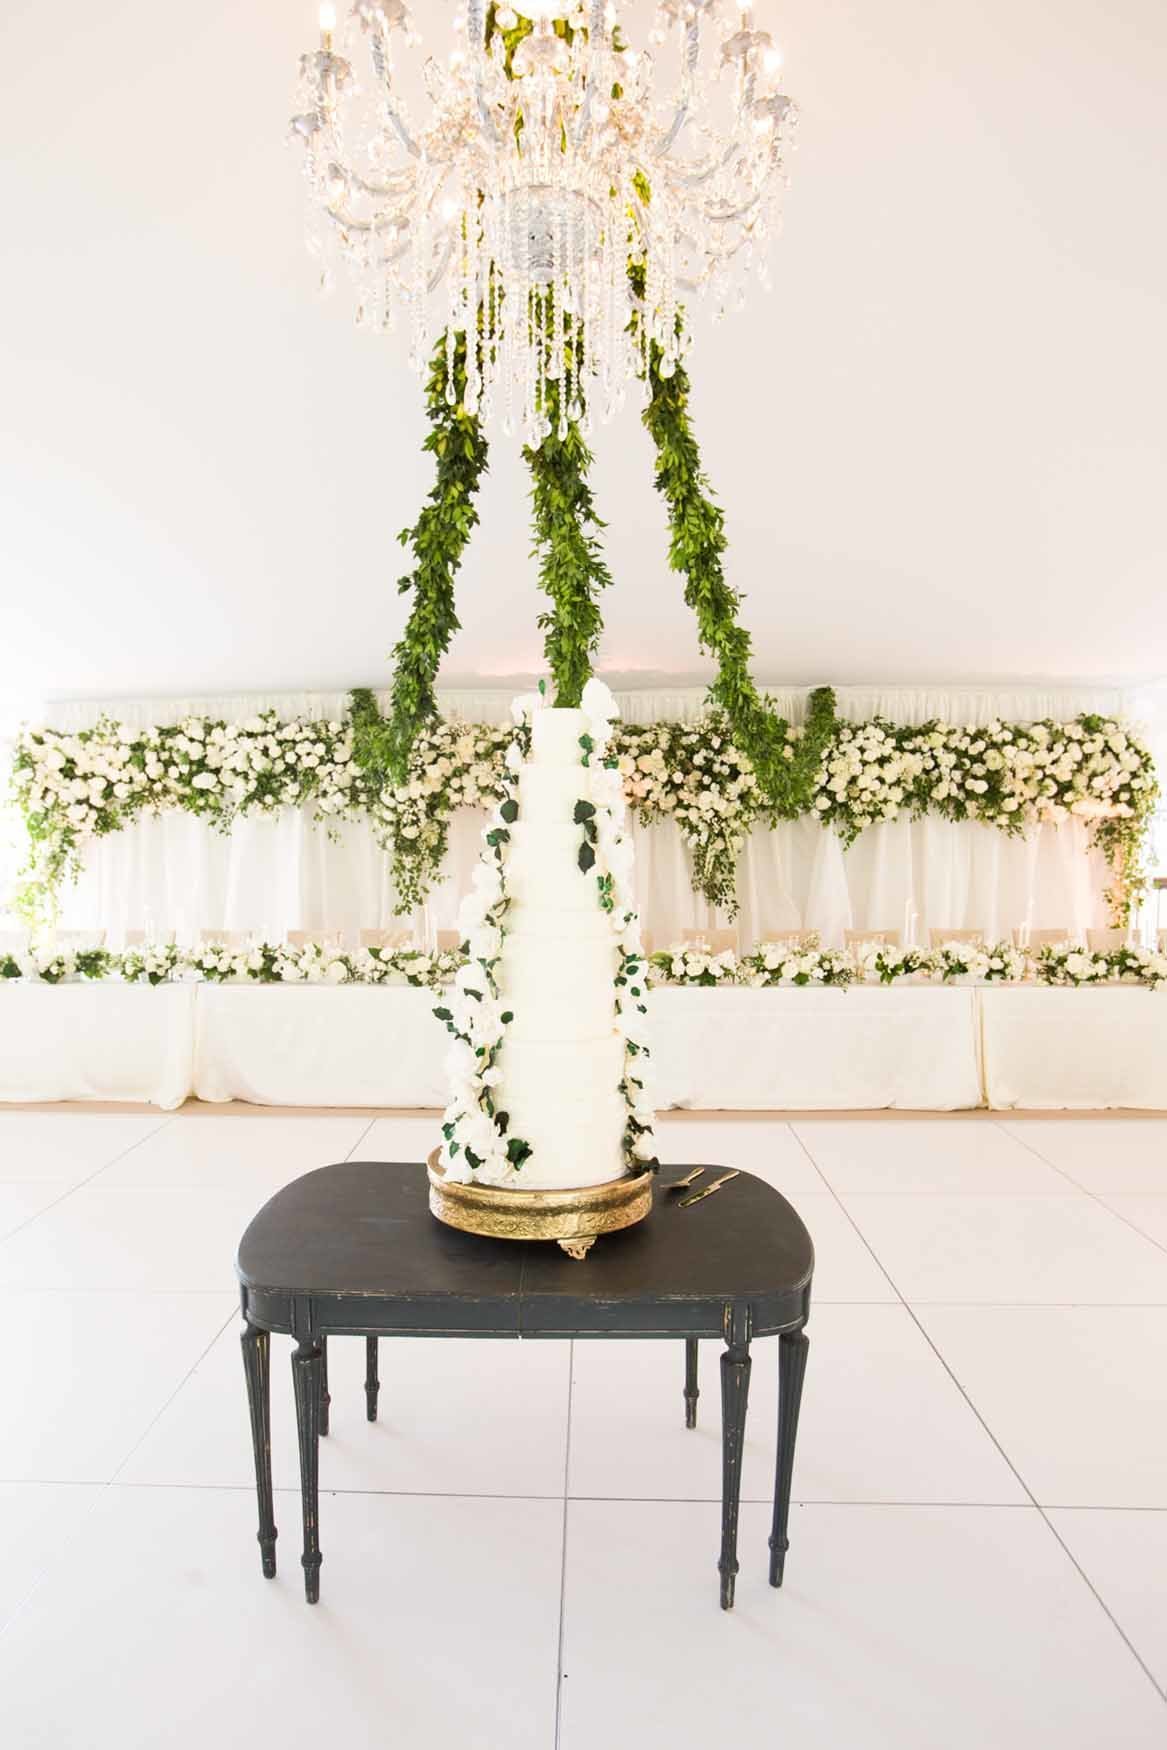 White wedding cake on table beneath a crystal chandelier and green garlands